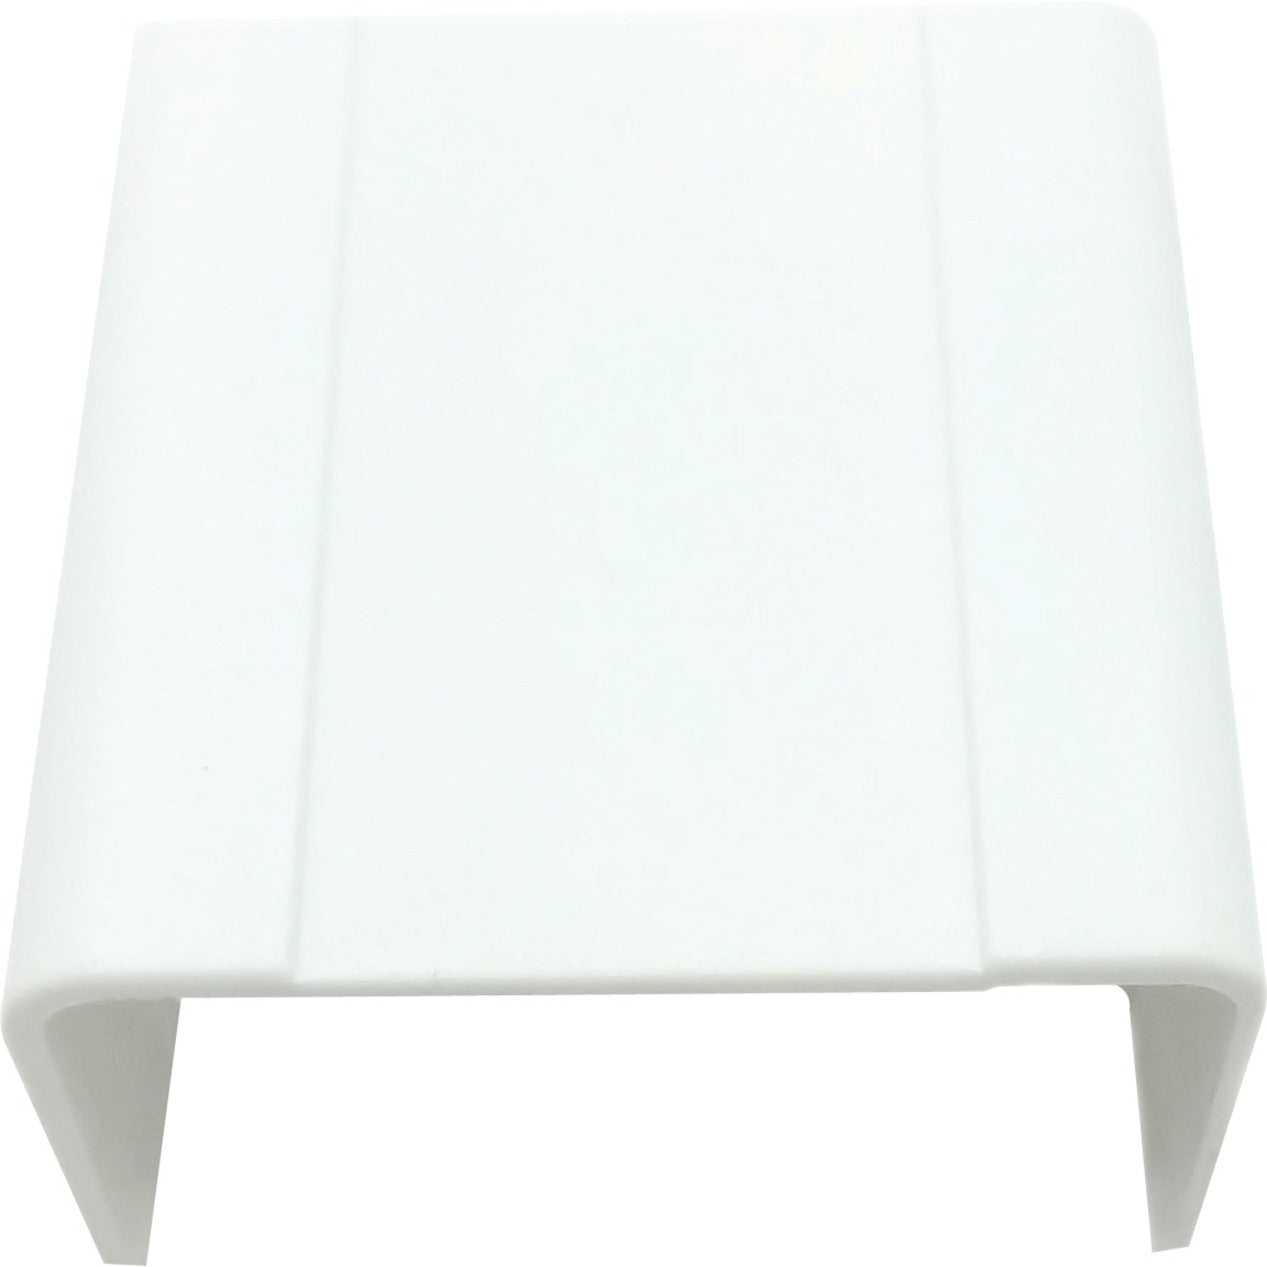 W Box 75JCW4 3/4" X 1/2" Joint Cover White 4 Pack, Cable Routing Solution